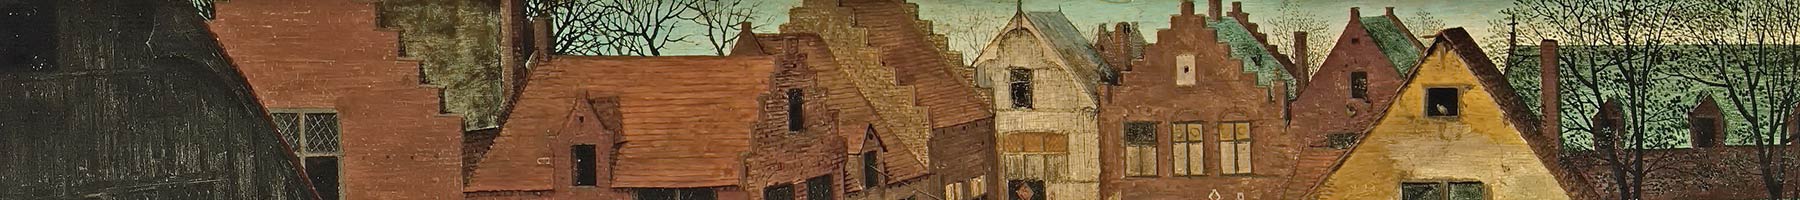 painting of rooftops